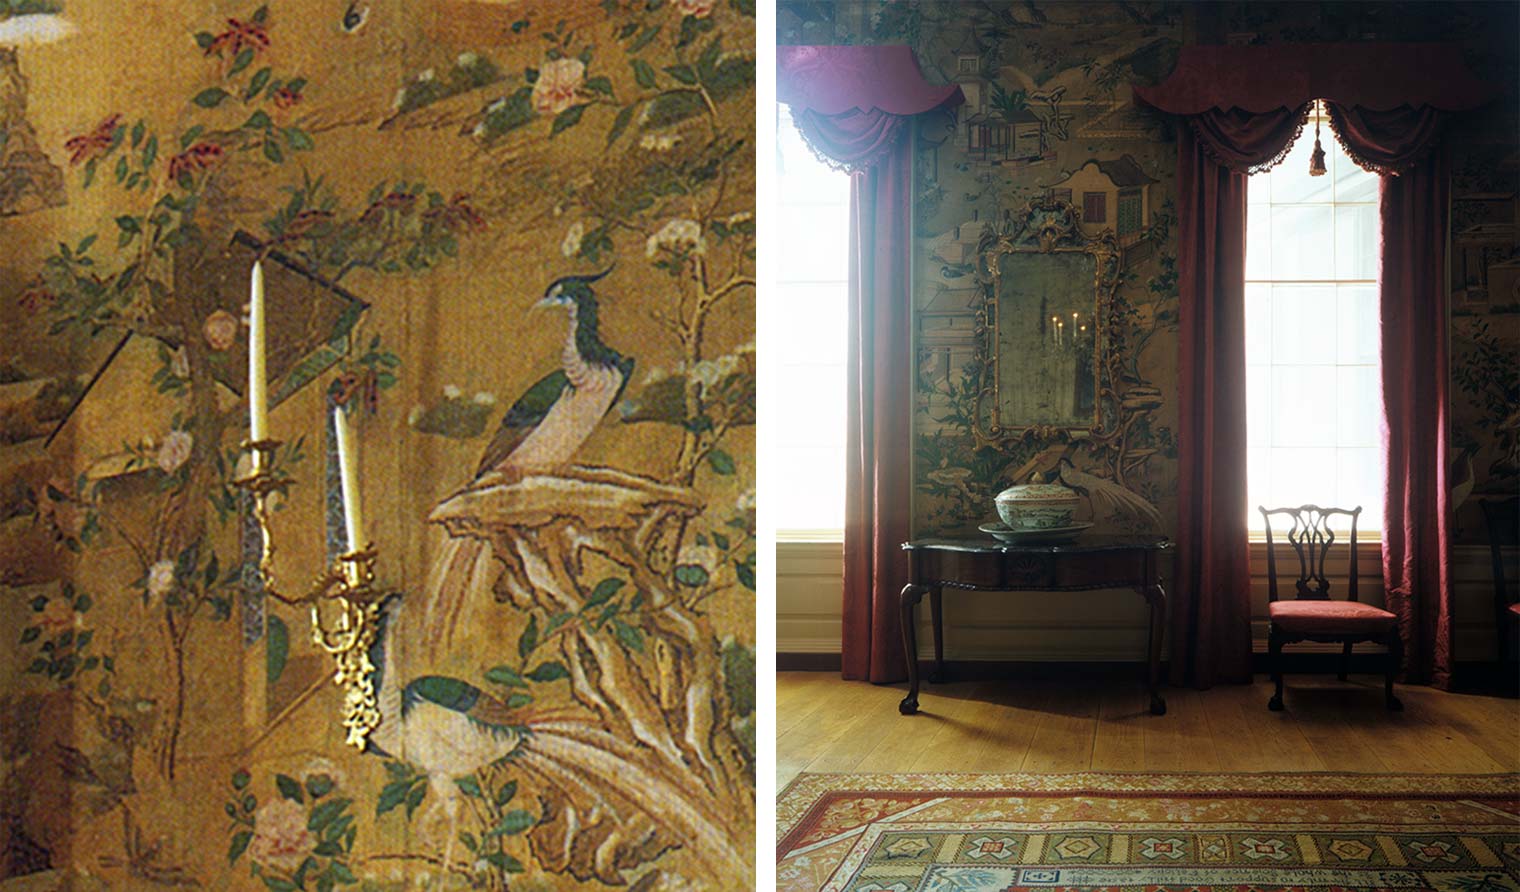 Composite image: on left, close-up of the wallpaper in the Powel Room, with birds and foliage on a gold background. On right, view of the windows and drapery in the Powel Room